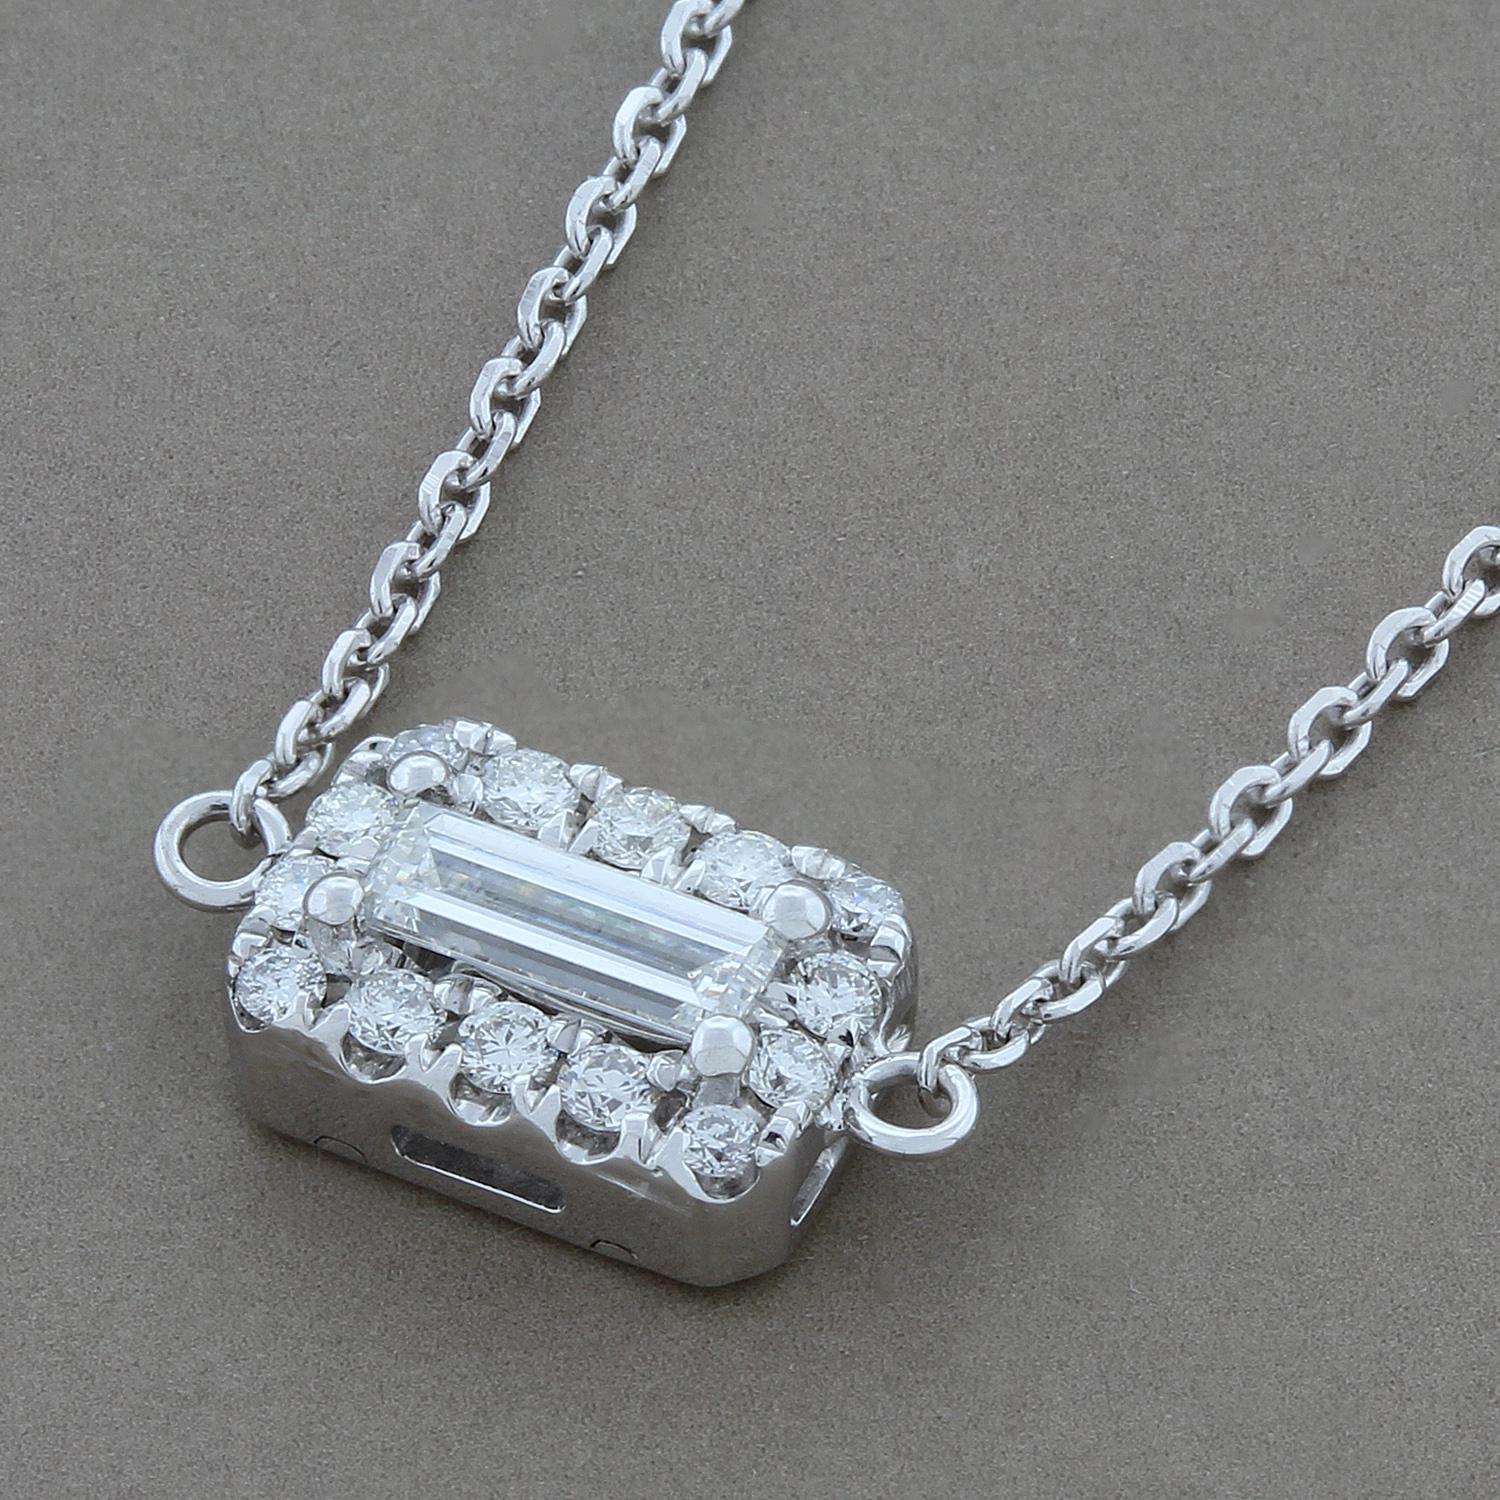 This everyday necklace features 0.50 carats of diamonds. The center emerald cut diamond is set on its side and is surrounded by a halo of round cut diamonds.  All diamonds are colorless VS quality.

Necklace Length: 17 inches with an adjustable loop